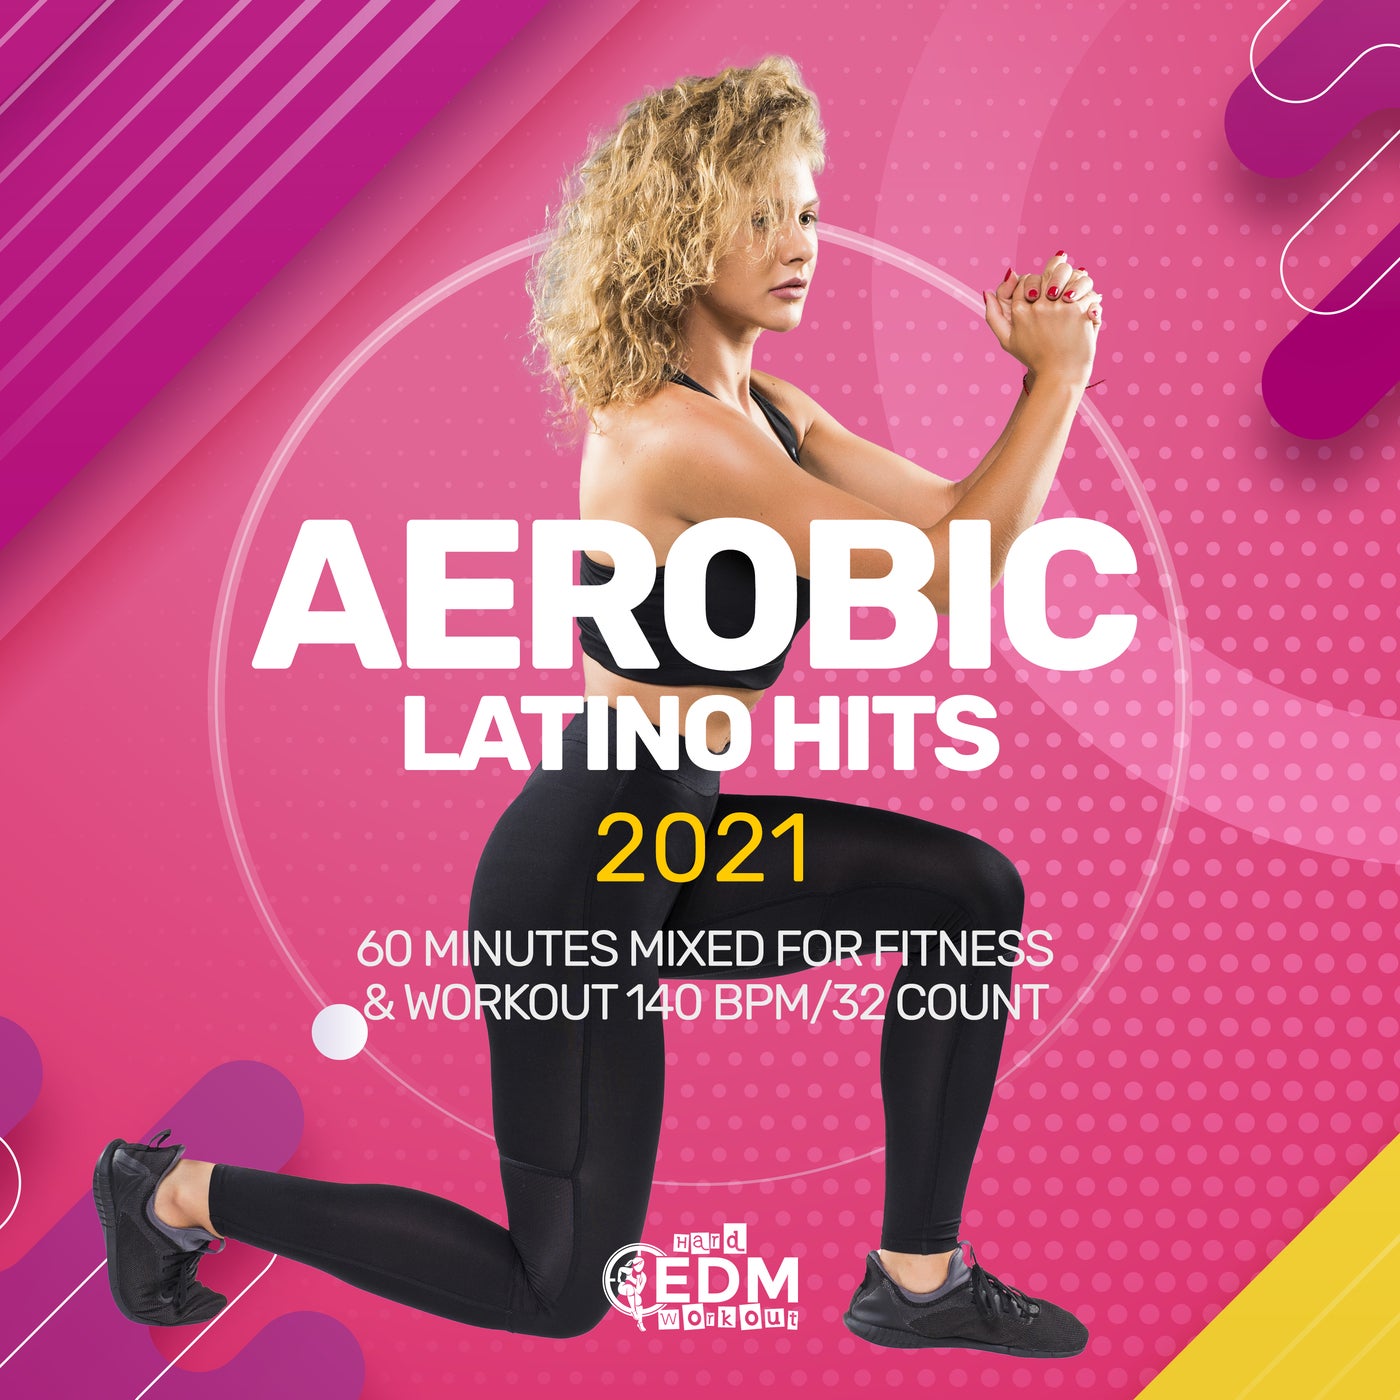 Aerobic Latino Hits 2021: 60 Minutes Mixed for Fitness & Workout 140 bpm/32 Count